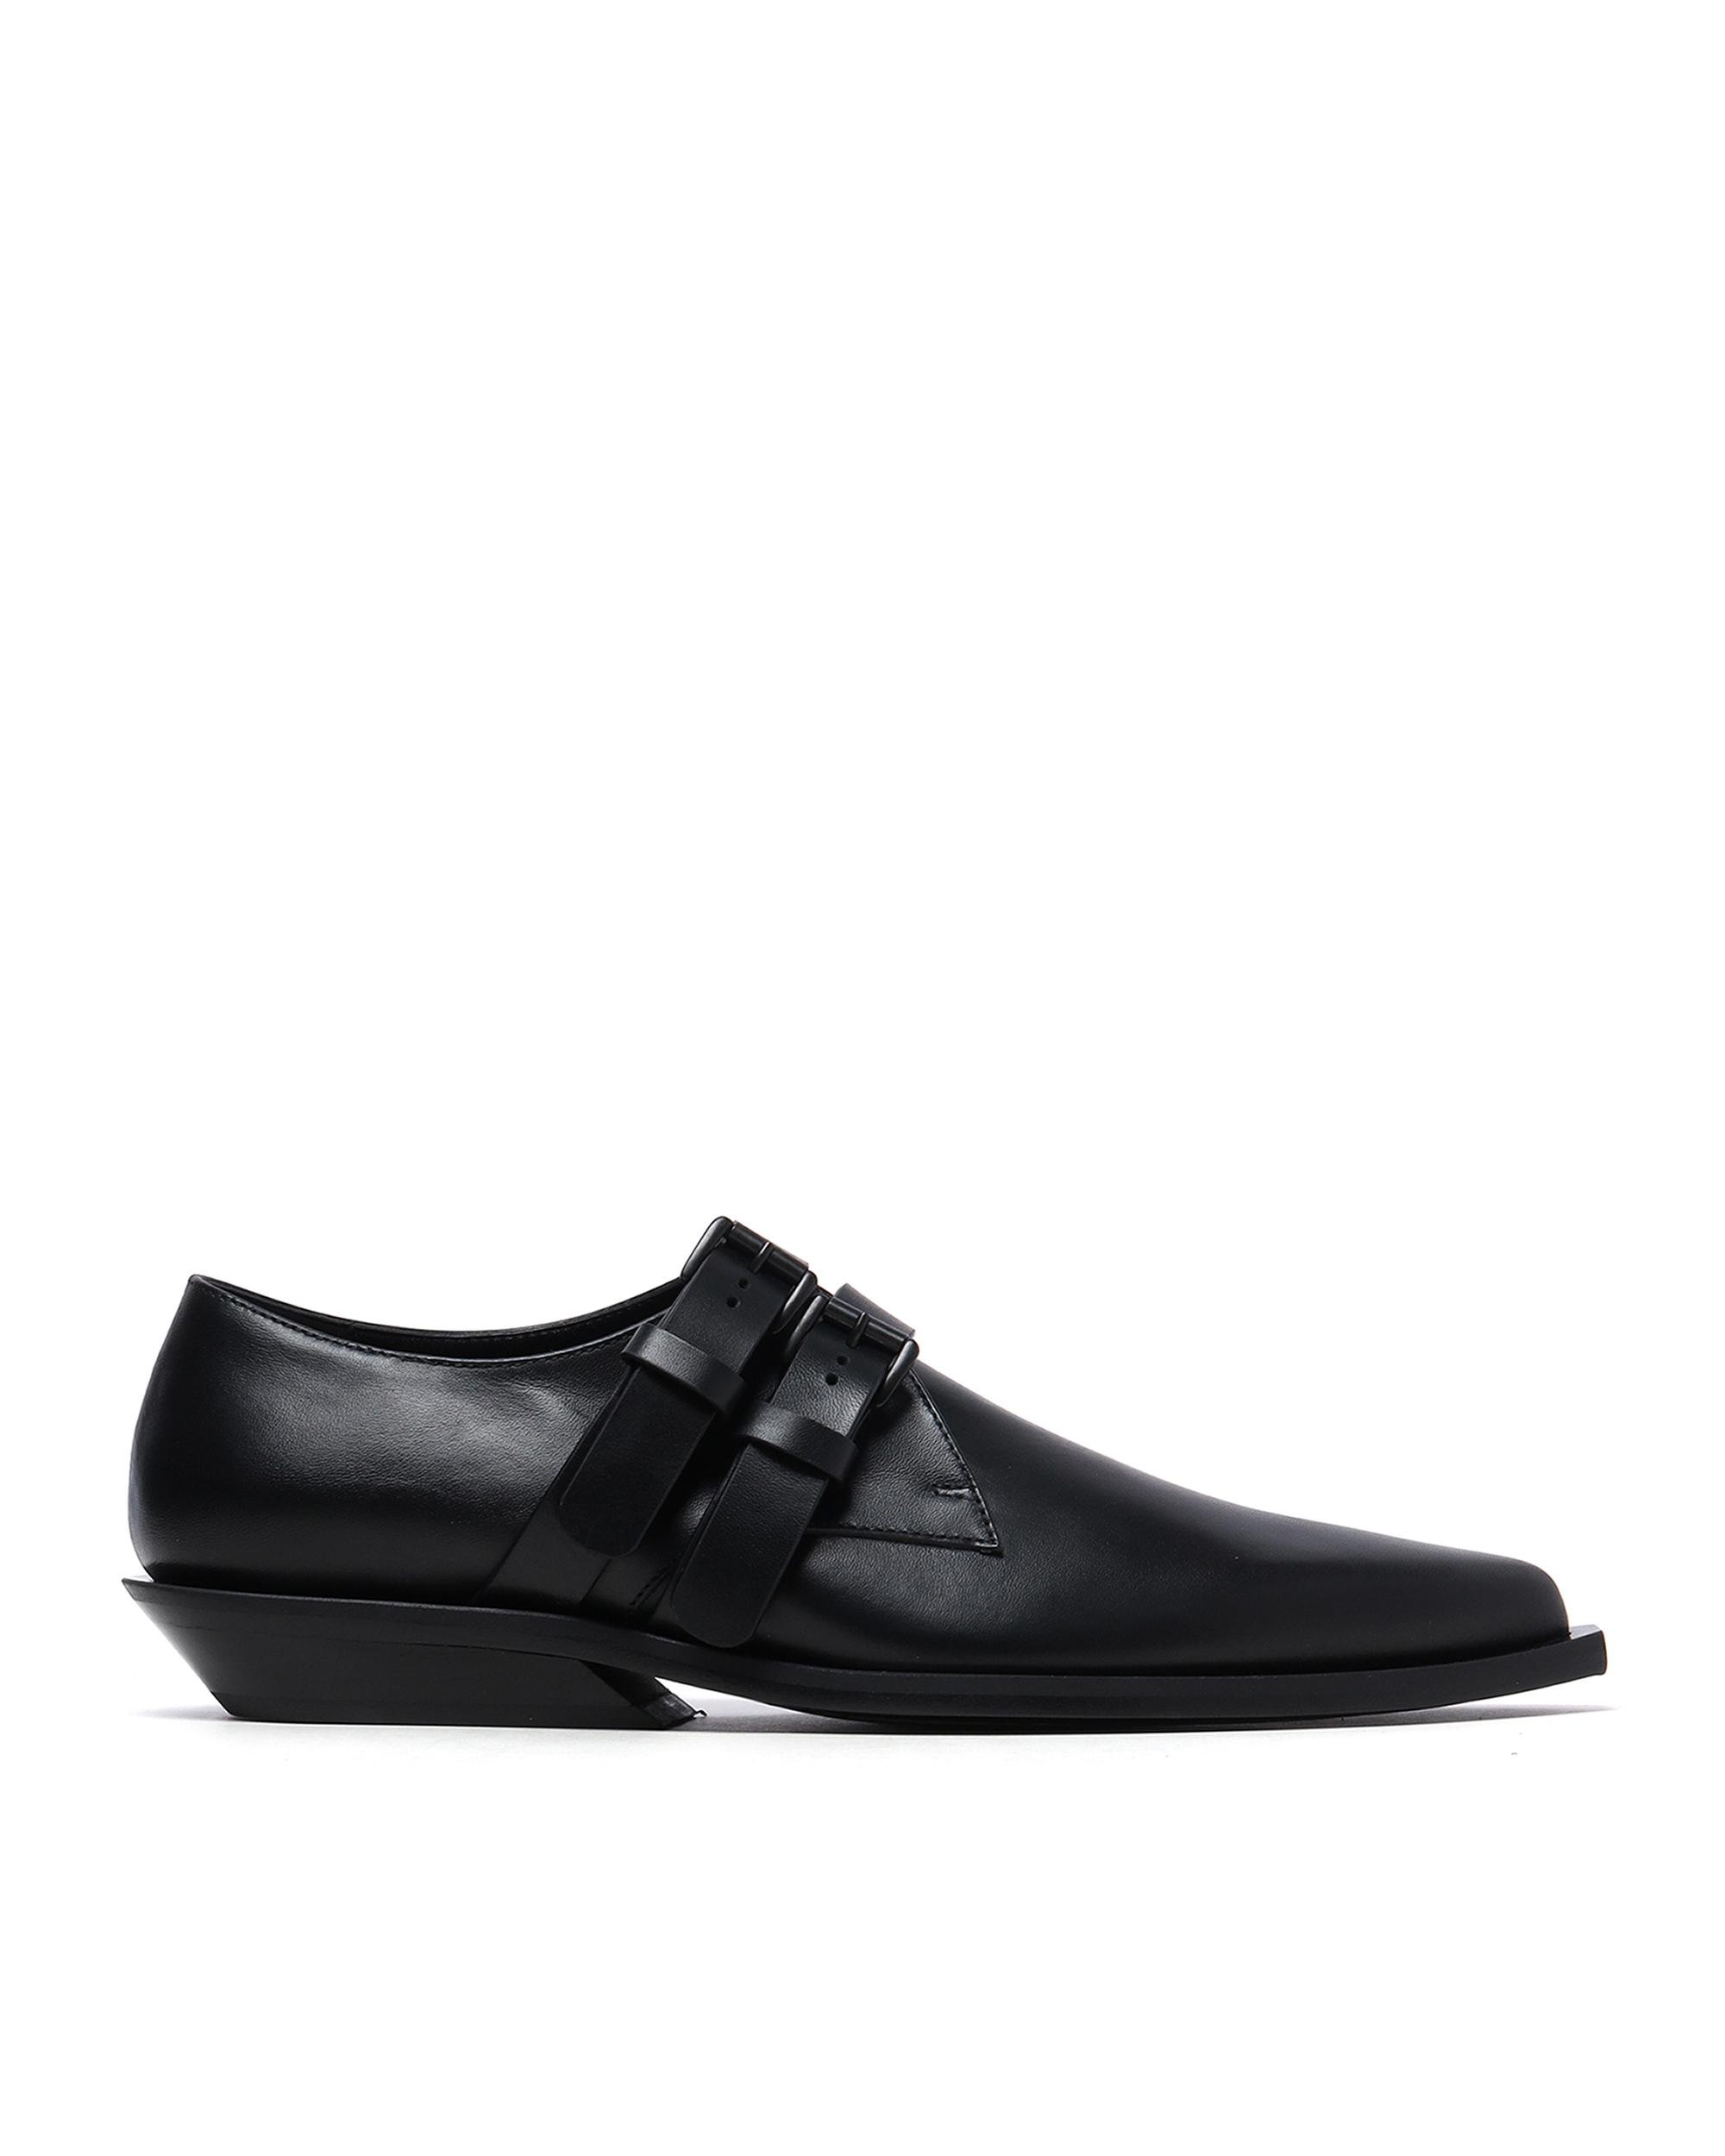 Bowie double monk strap shoes by ANN DEMEULEMEESTER